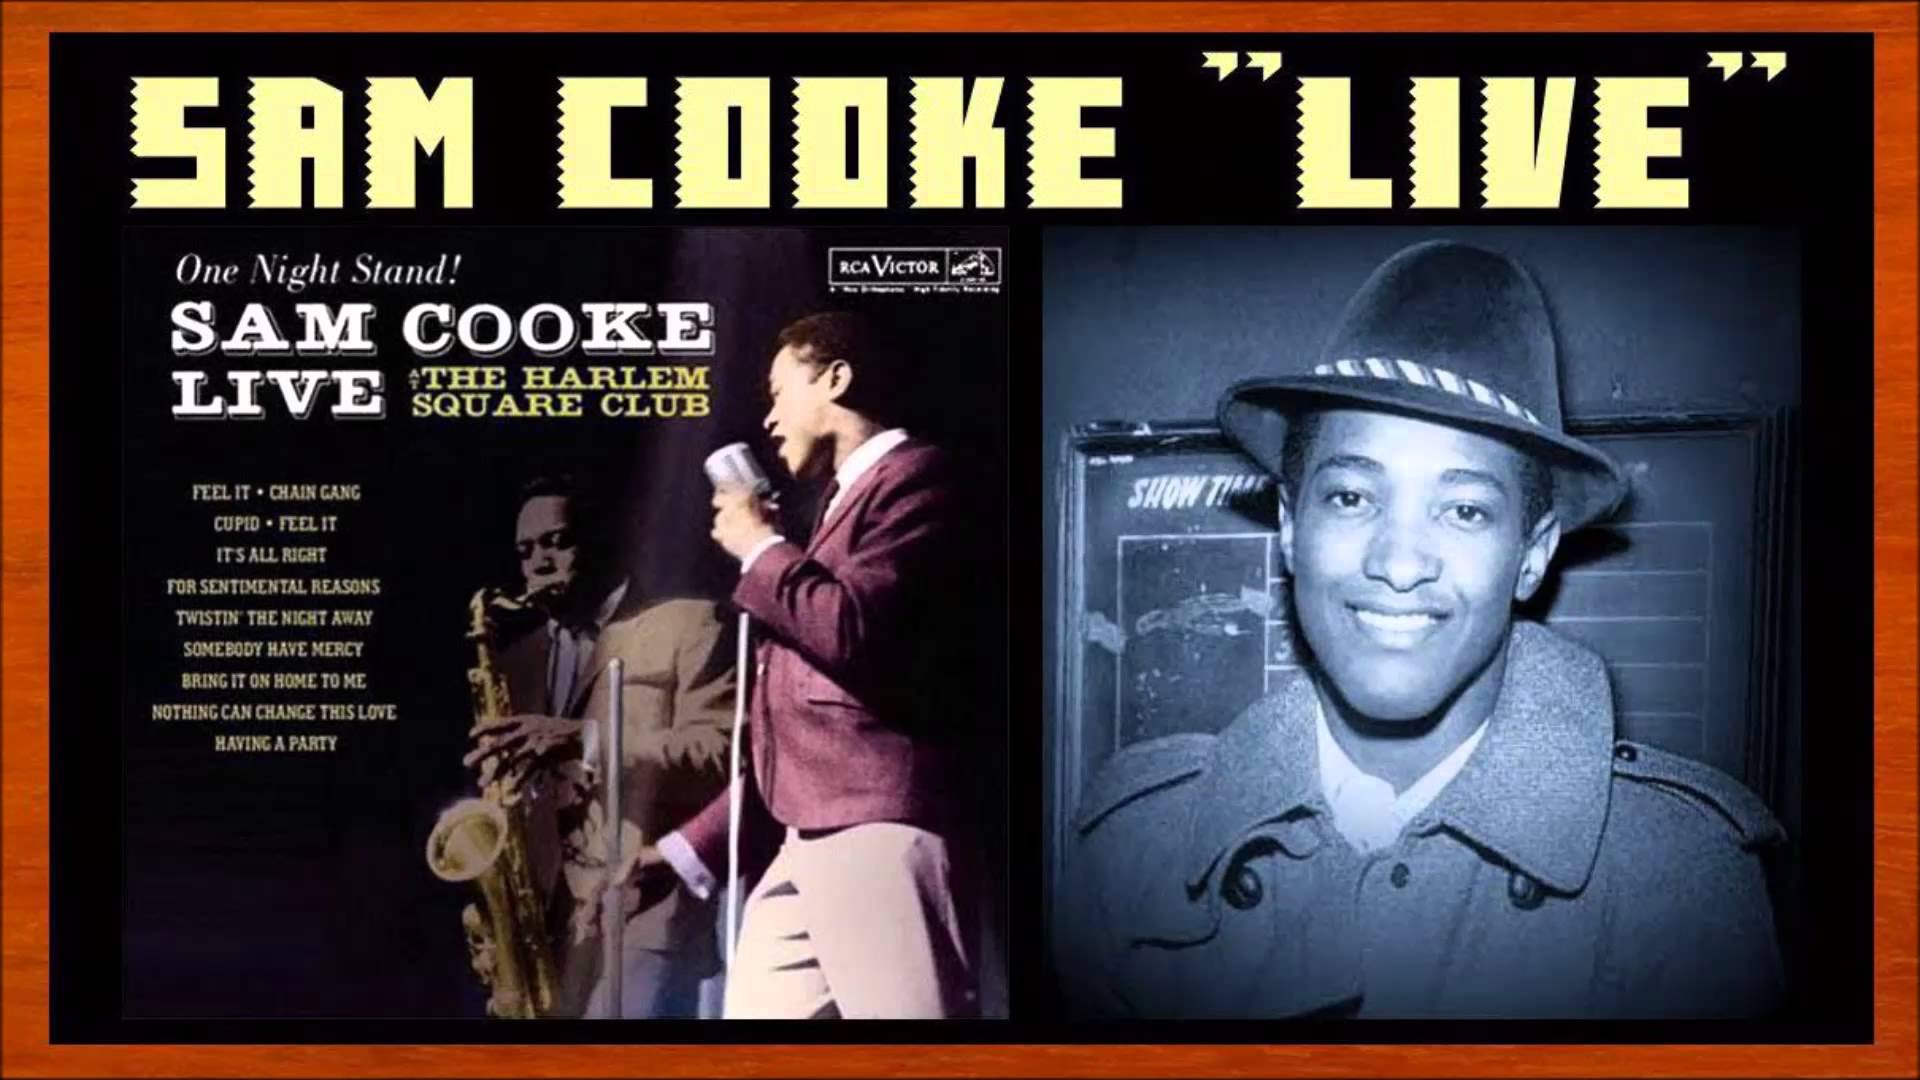 Sam Cooke A Party [Live At The Harlem Square Club] 1963